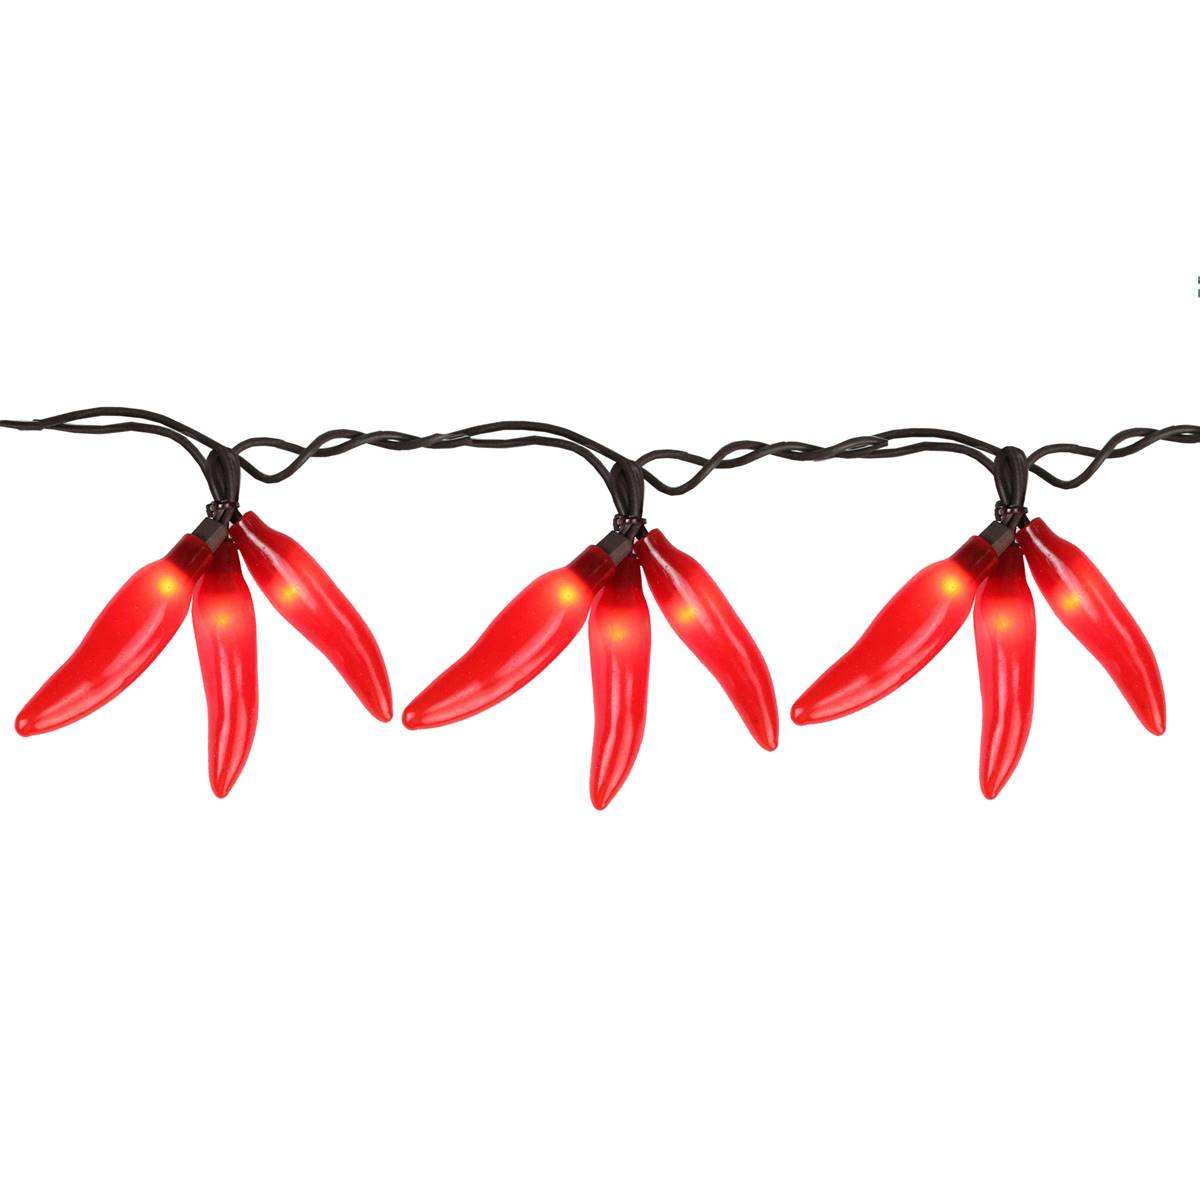 Northlight Seasonal 36ct. Red Chili Pepper Cluster String Lights